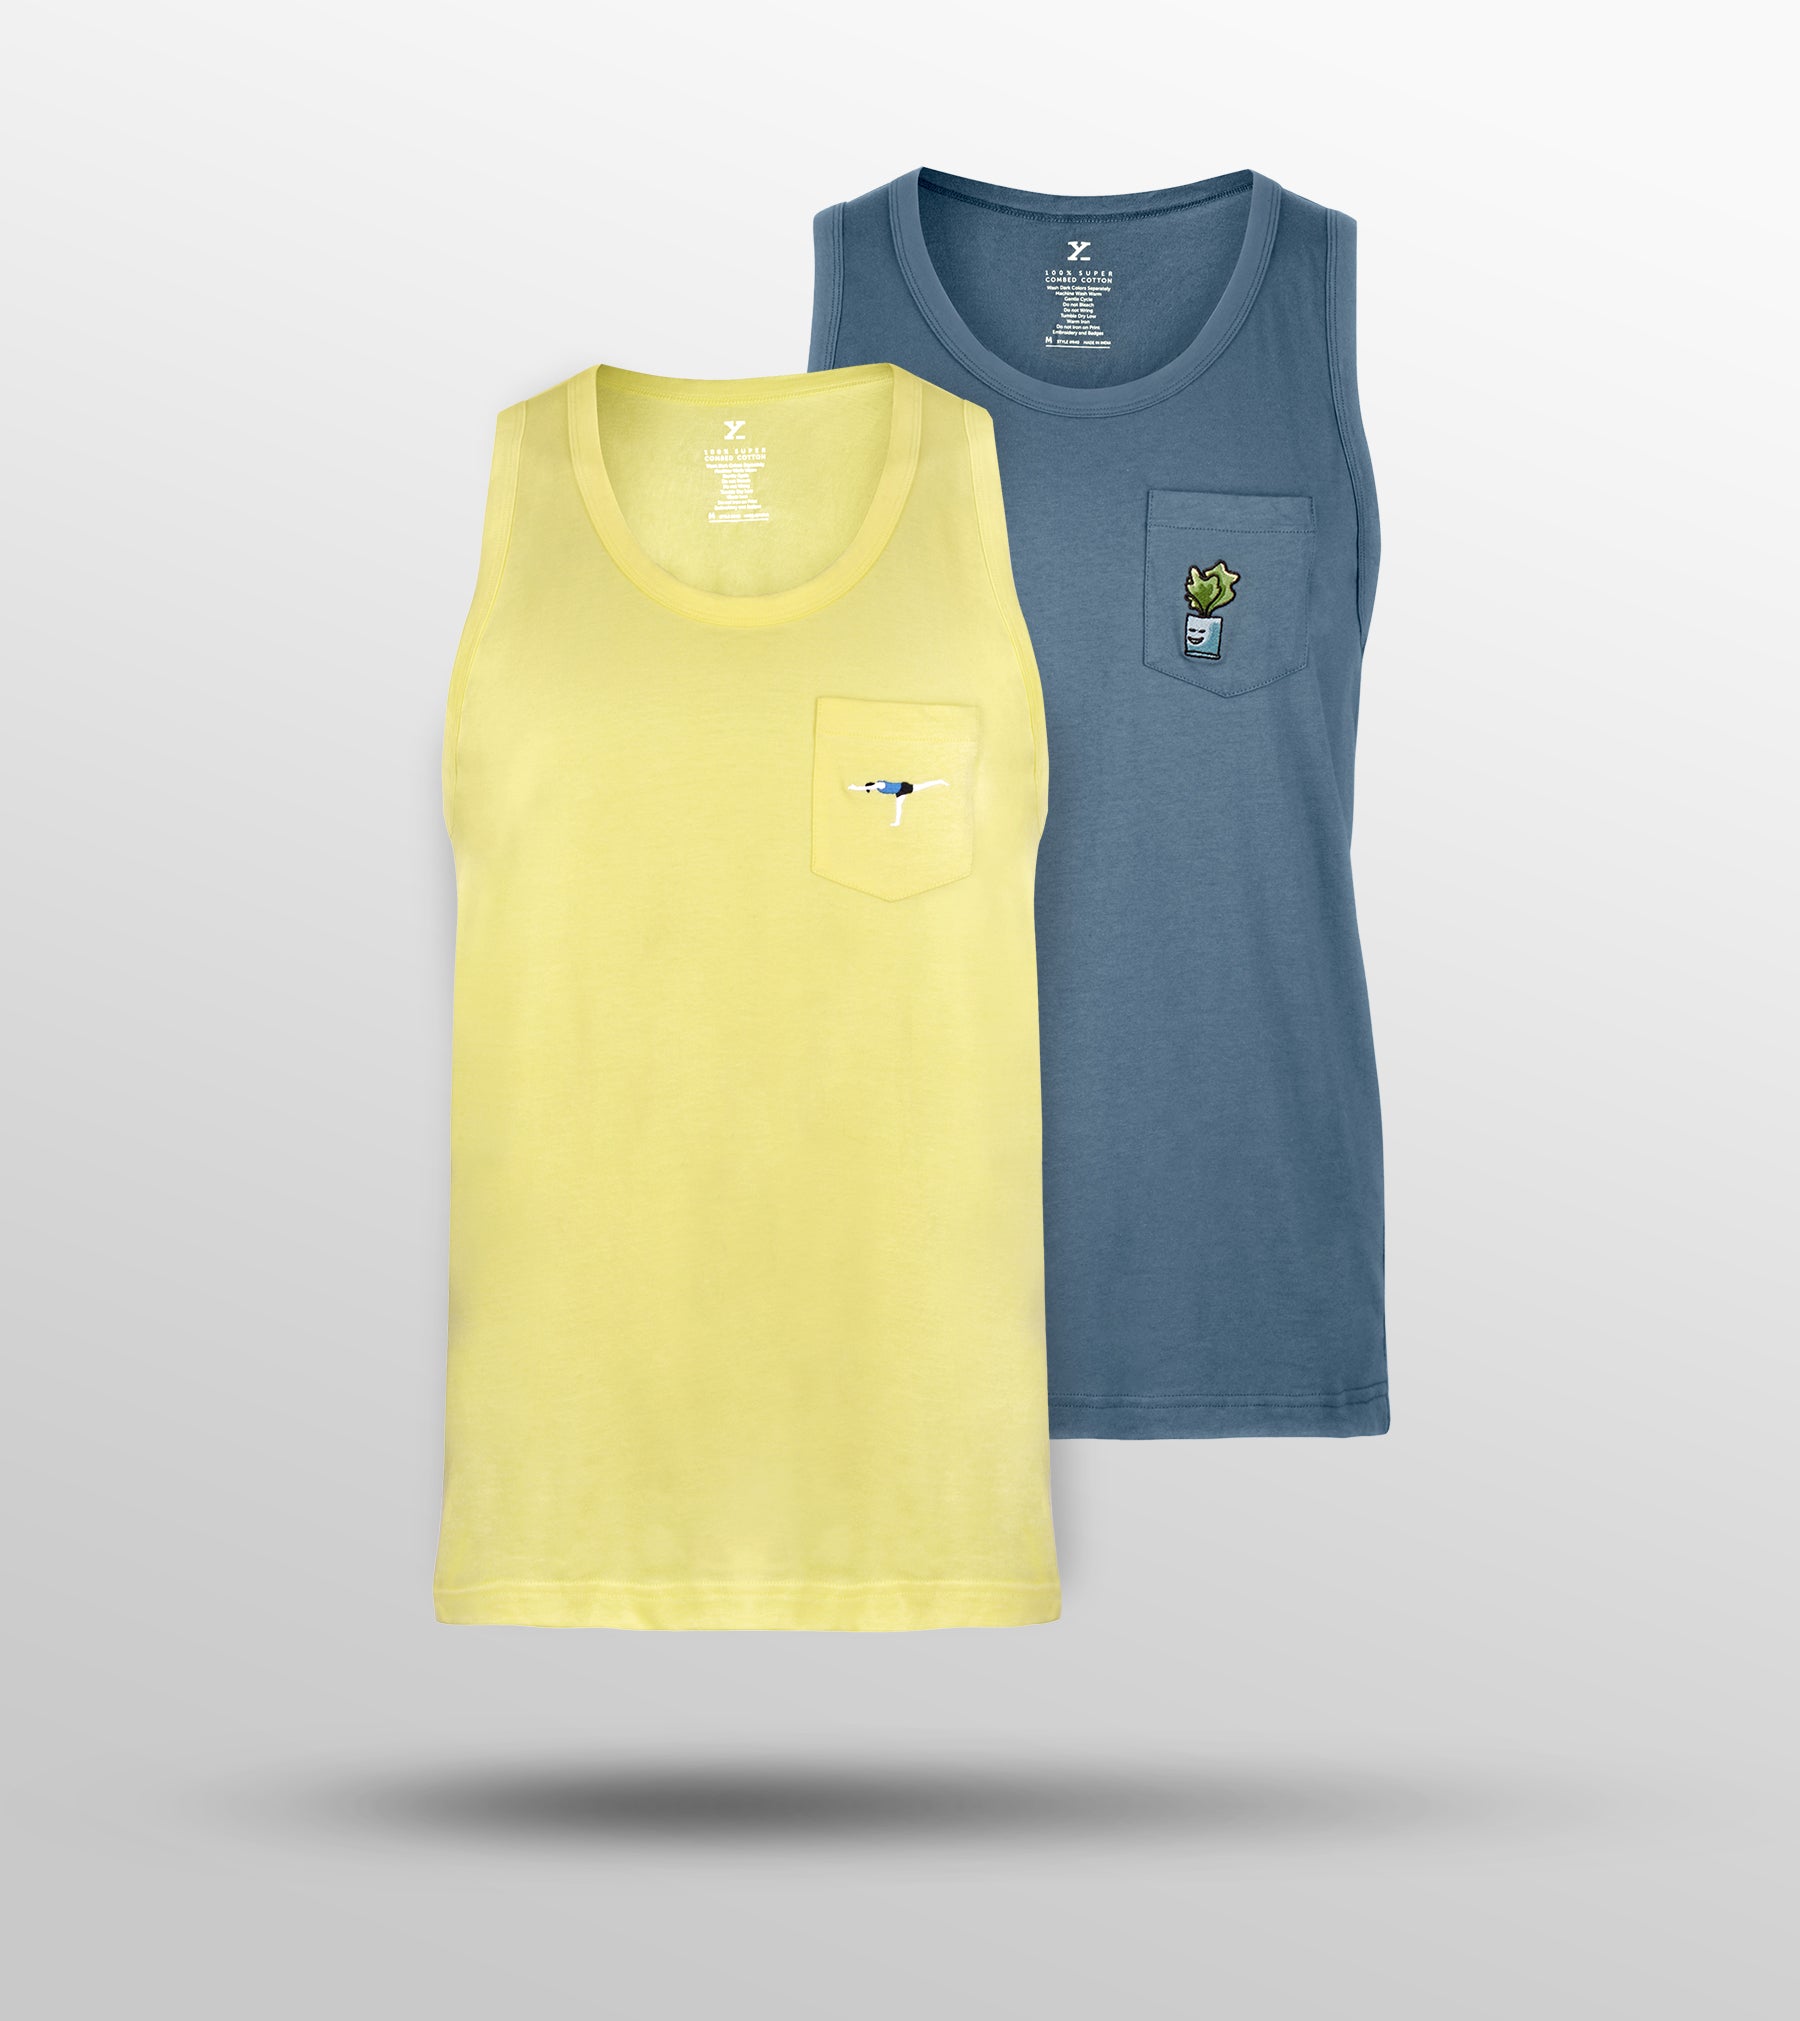 Renew Combed Cotton Fashion Vests For Mens Pack of 2 (Yellow, Light Blue) - XYXX Mens Apparels